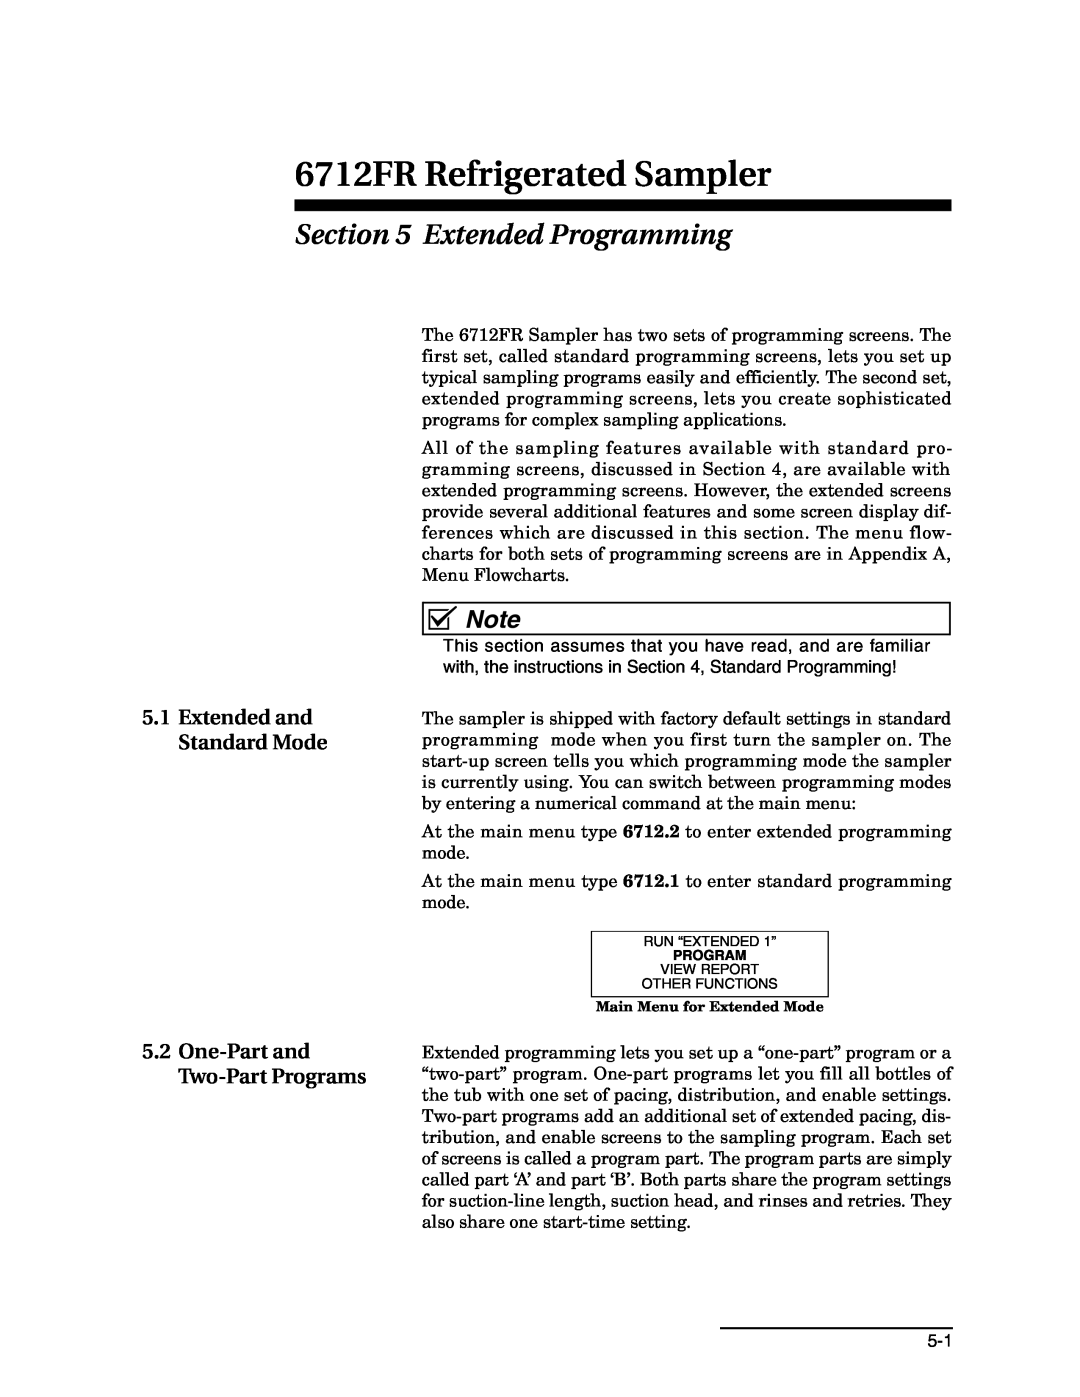 Teledyne 6712FR manual Extended Programming, Extended and Standard Mode 5.2 One-Part and Two-Part Programs 